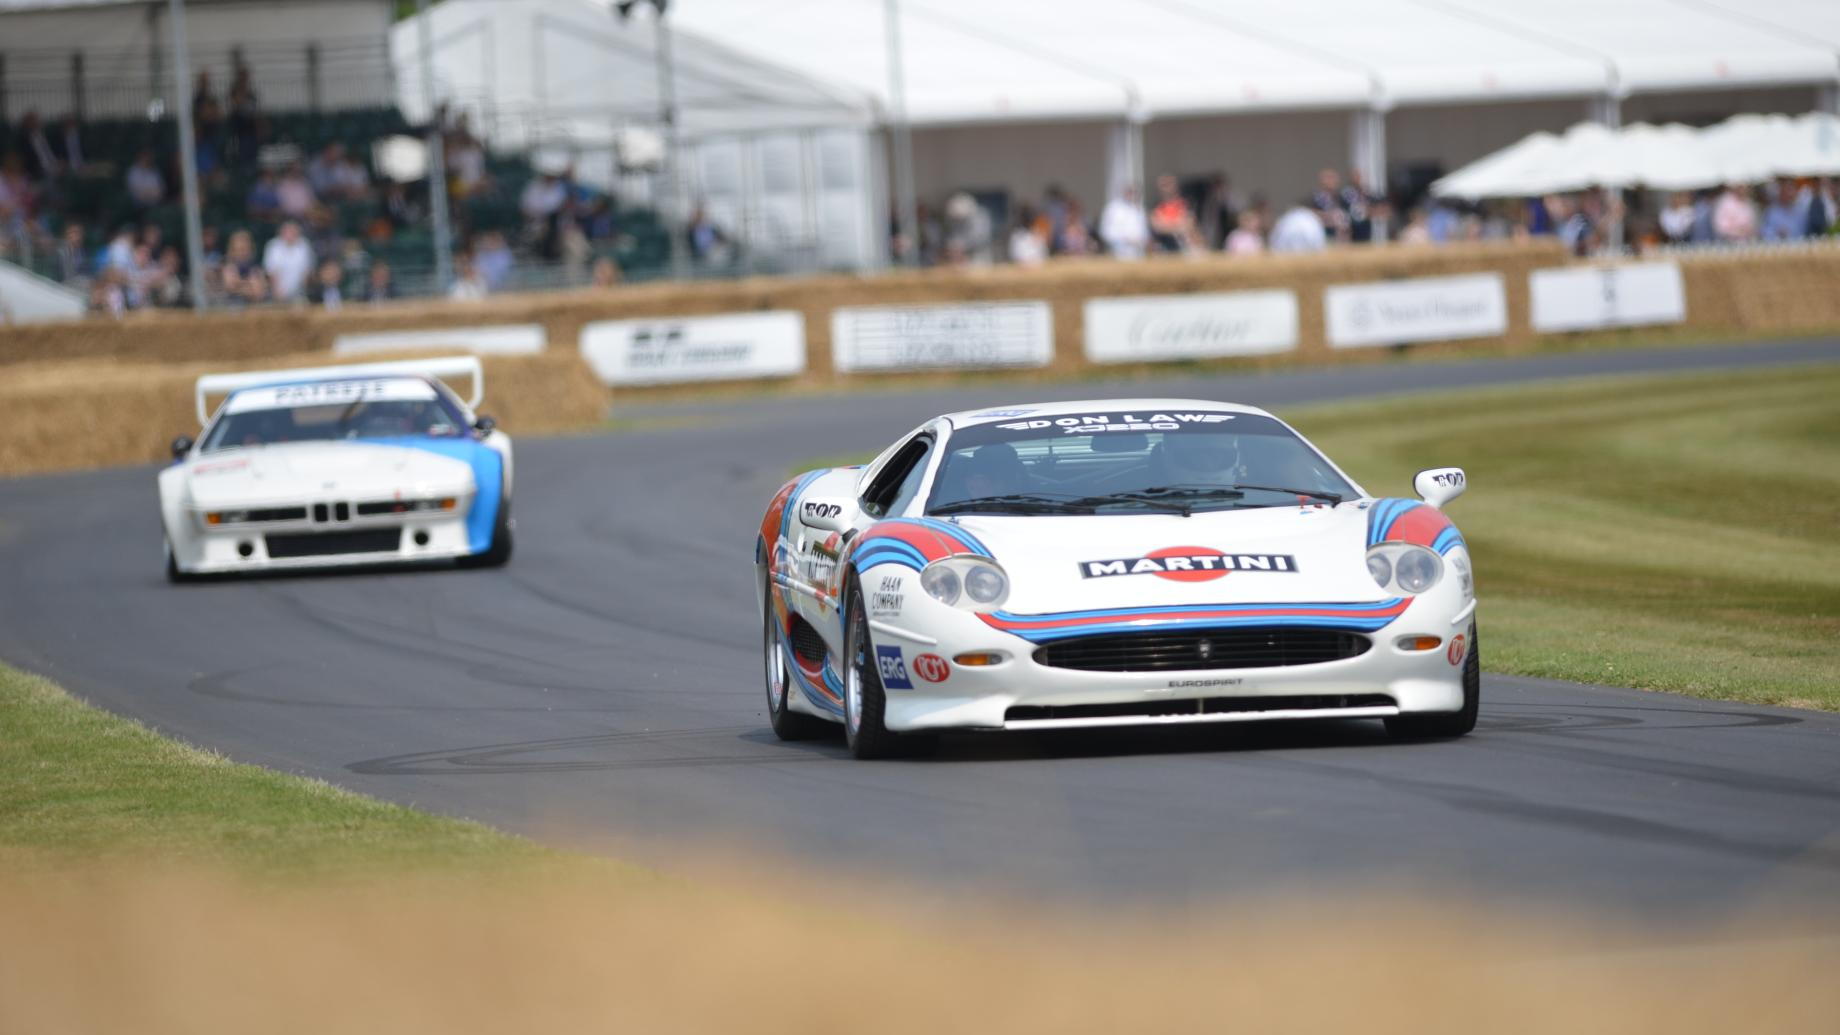 2013 Goodwood Festival of Speed lineup